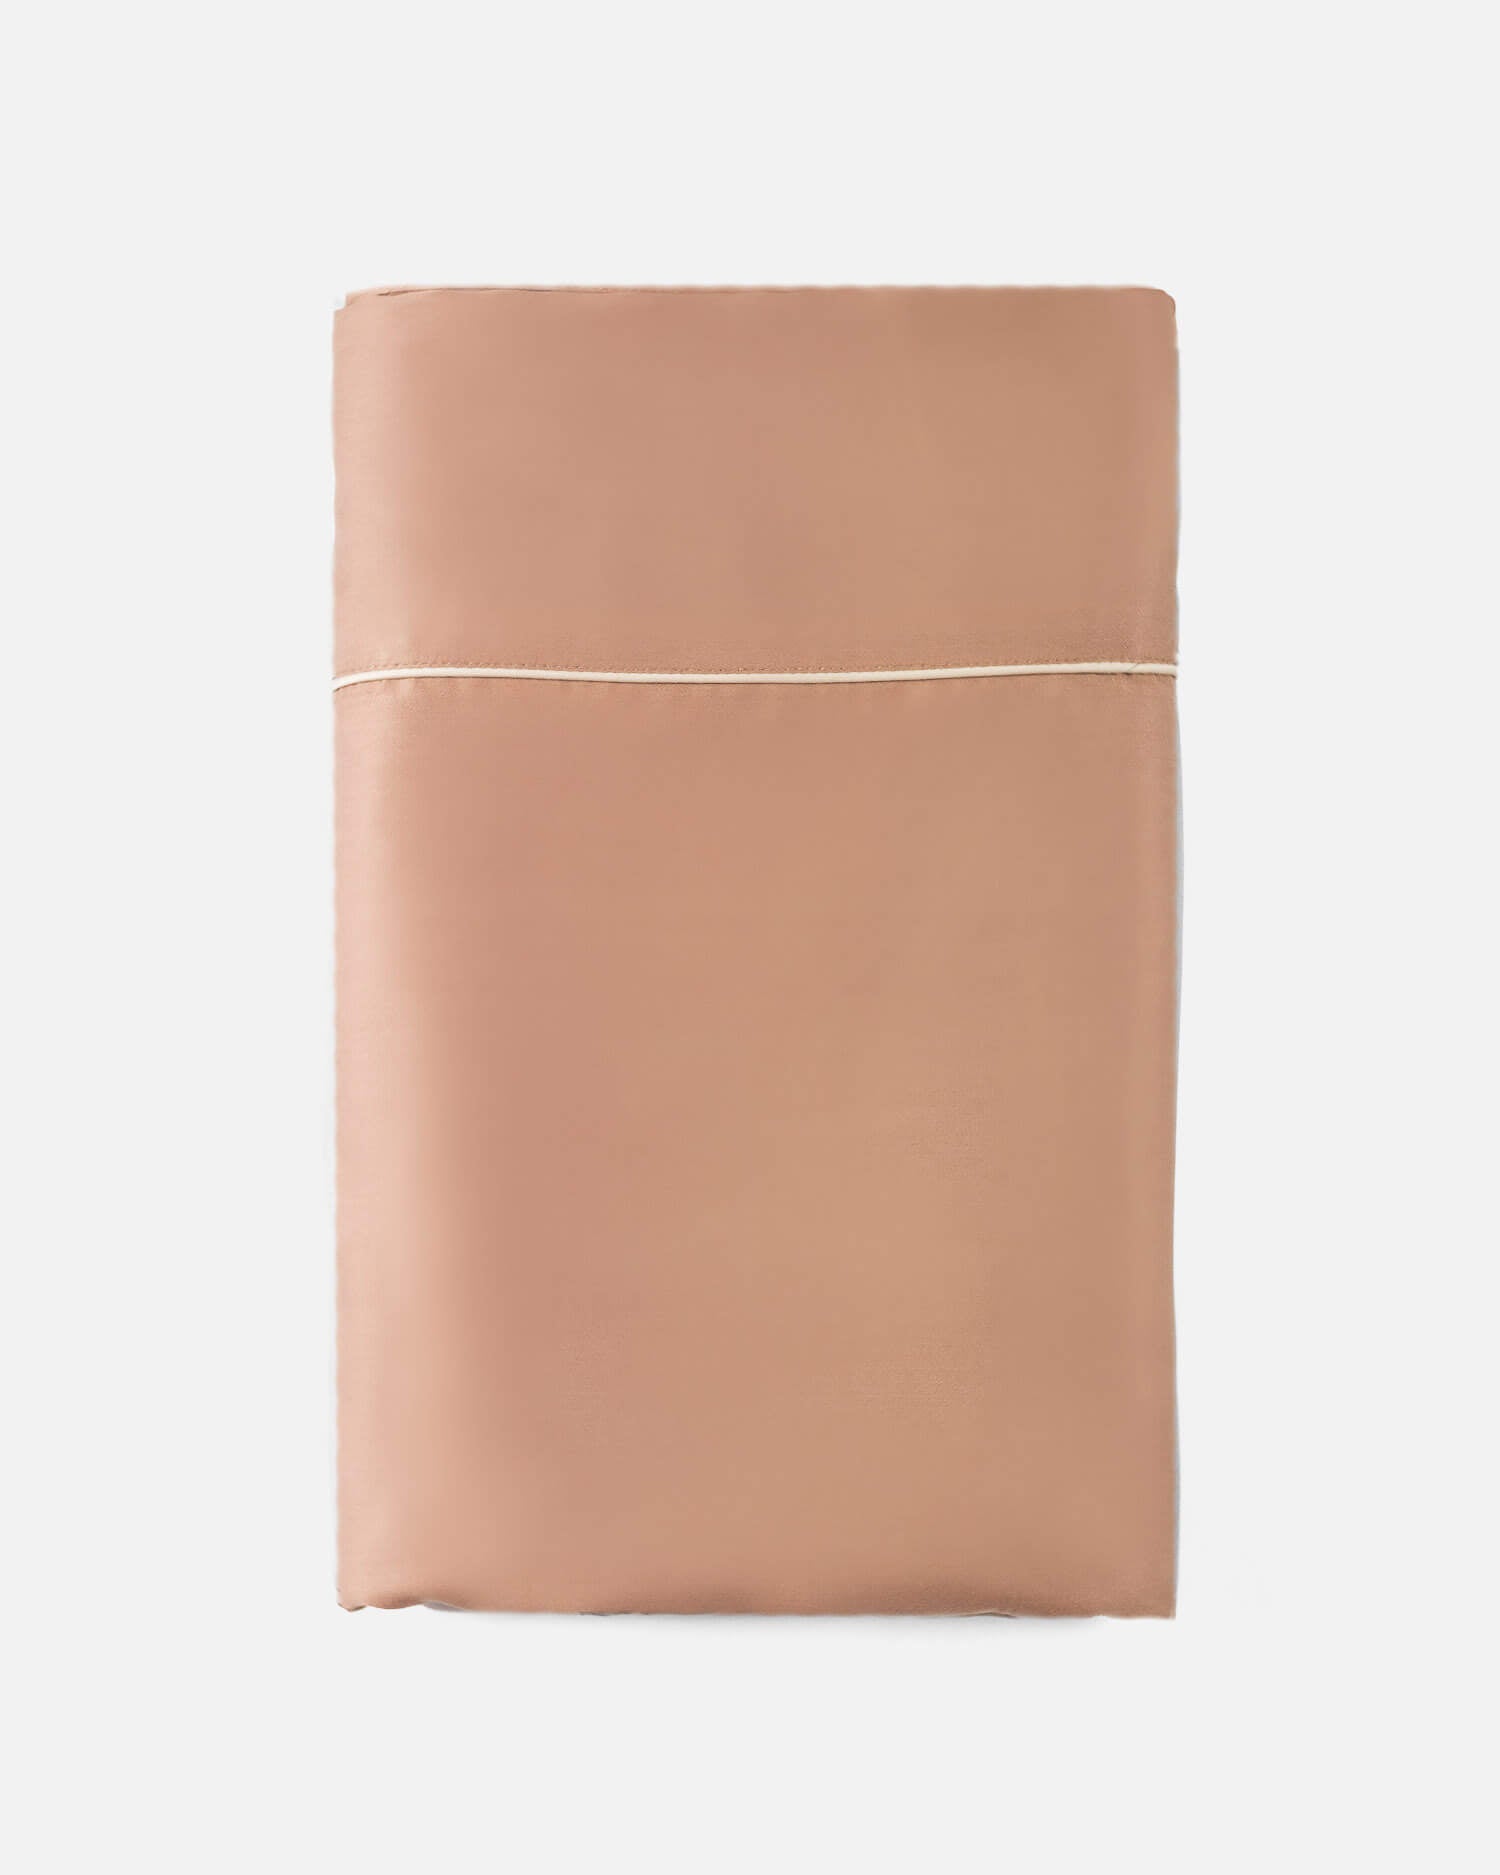 ava and ava ph organic bamboo lyocell flat sheet autumn ochre with beige contrast piping at the top hem